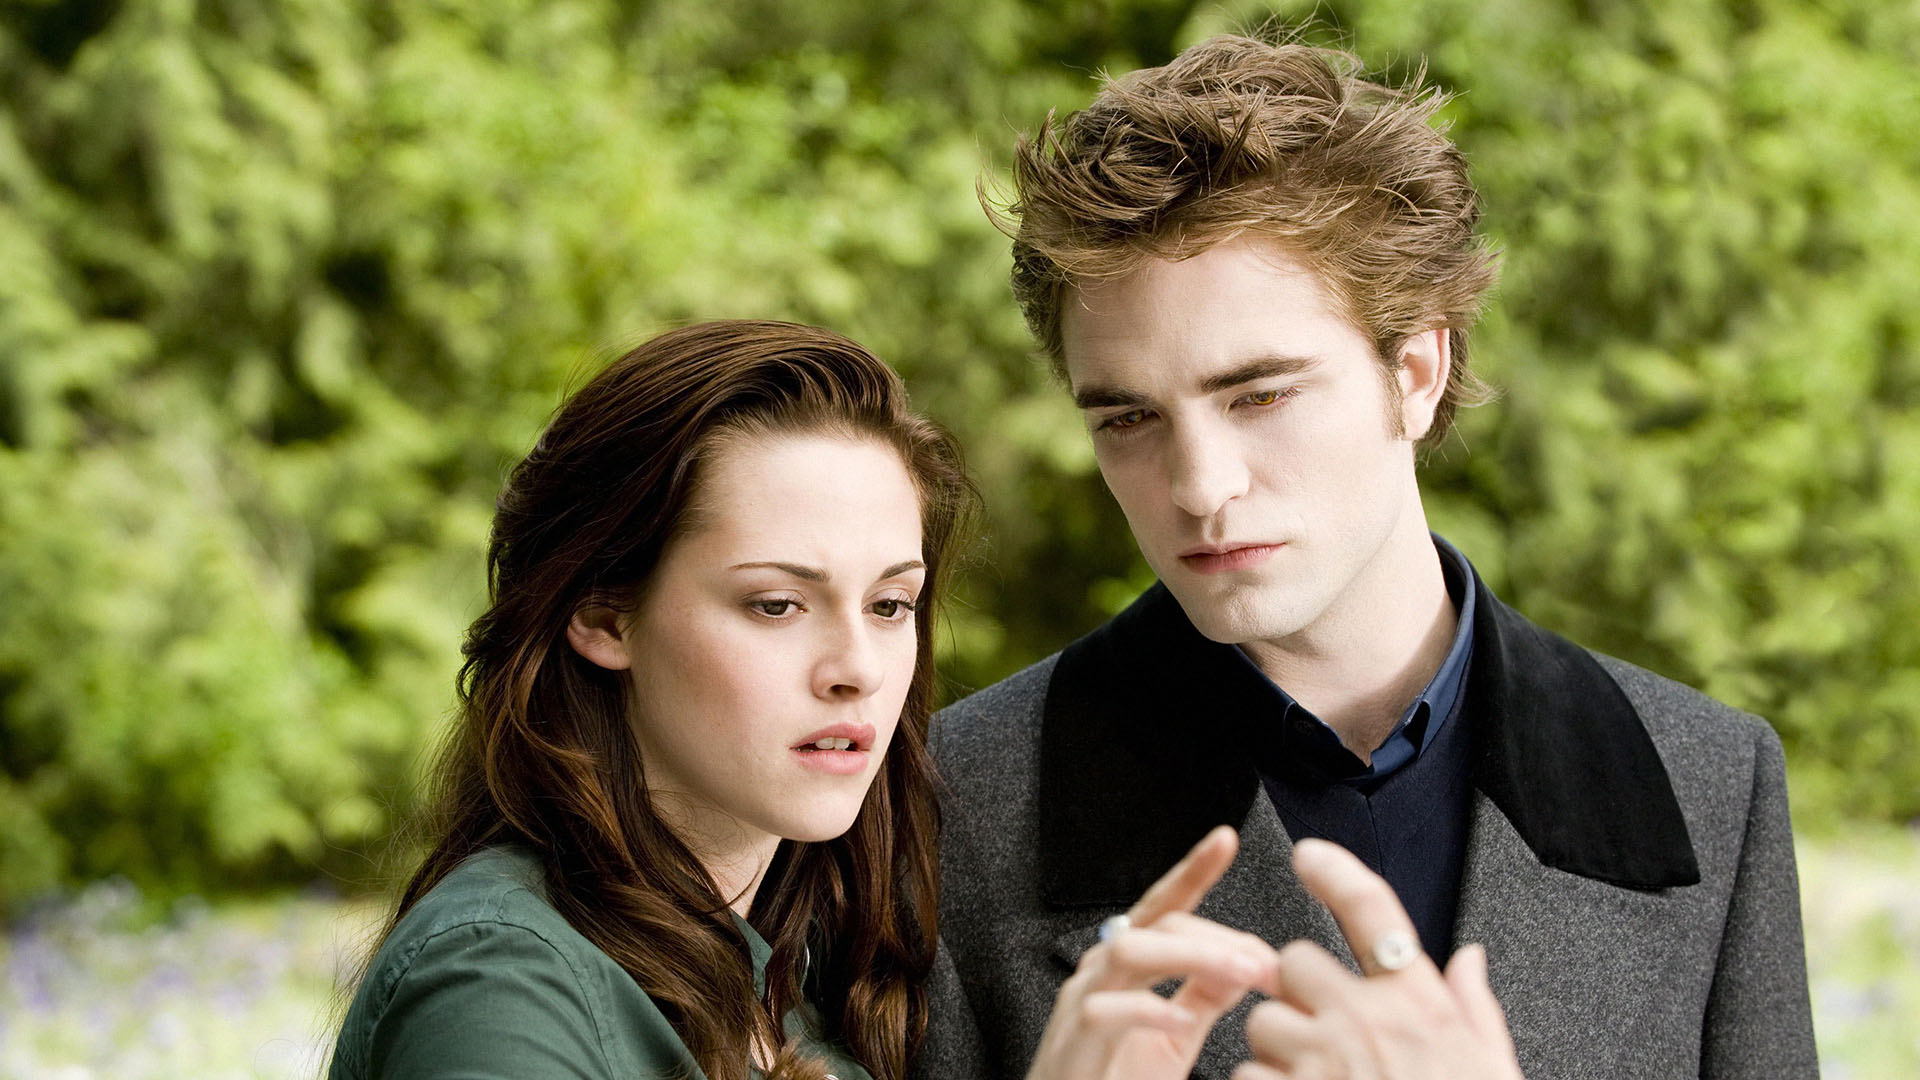 Twilight Heartthrob Almost Didn't Get the Role For a Very Peculiar Reason